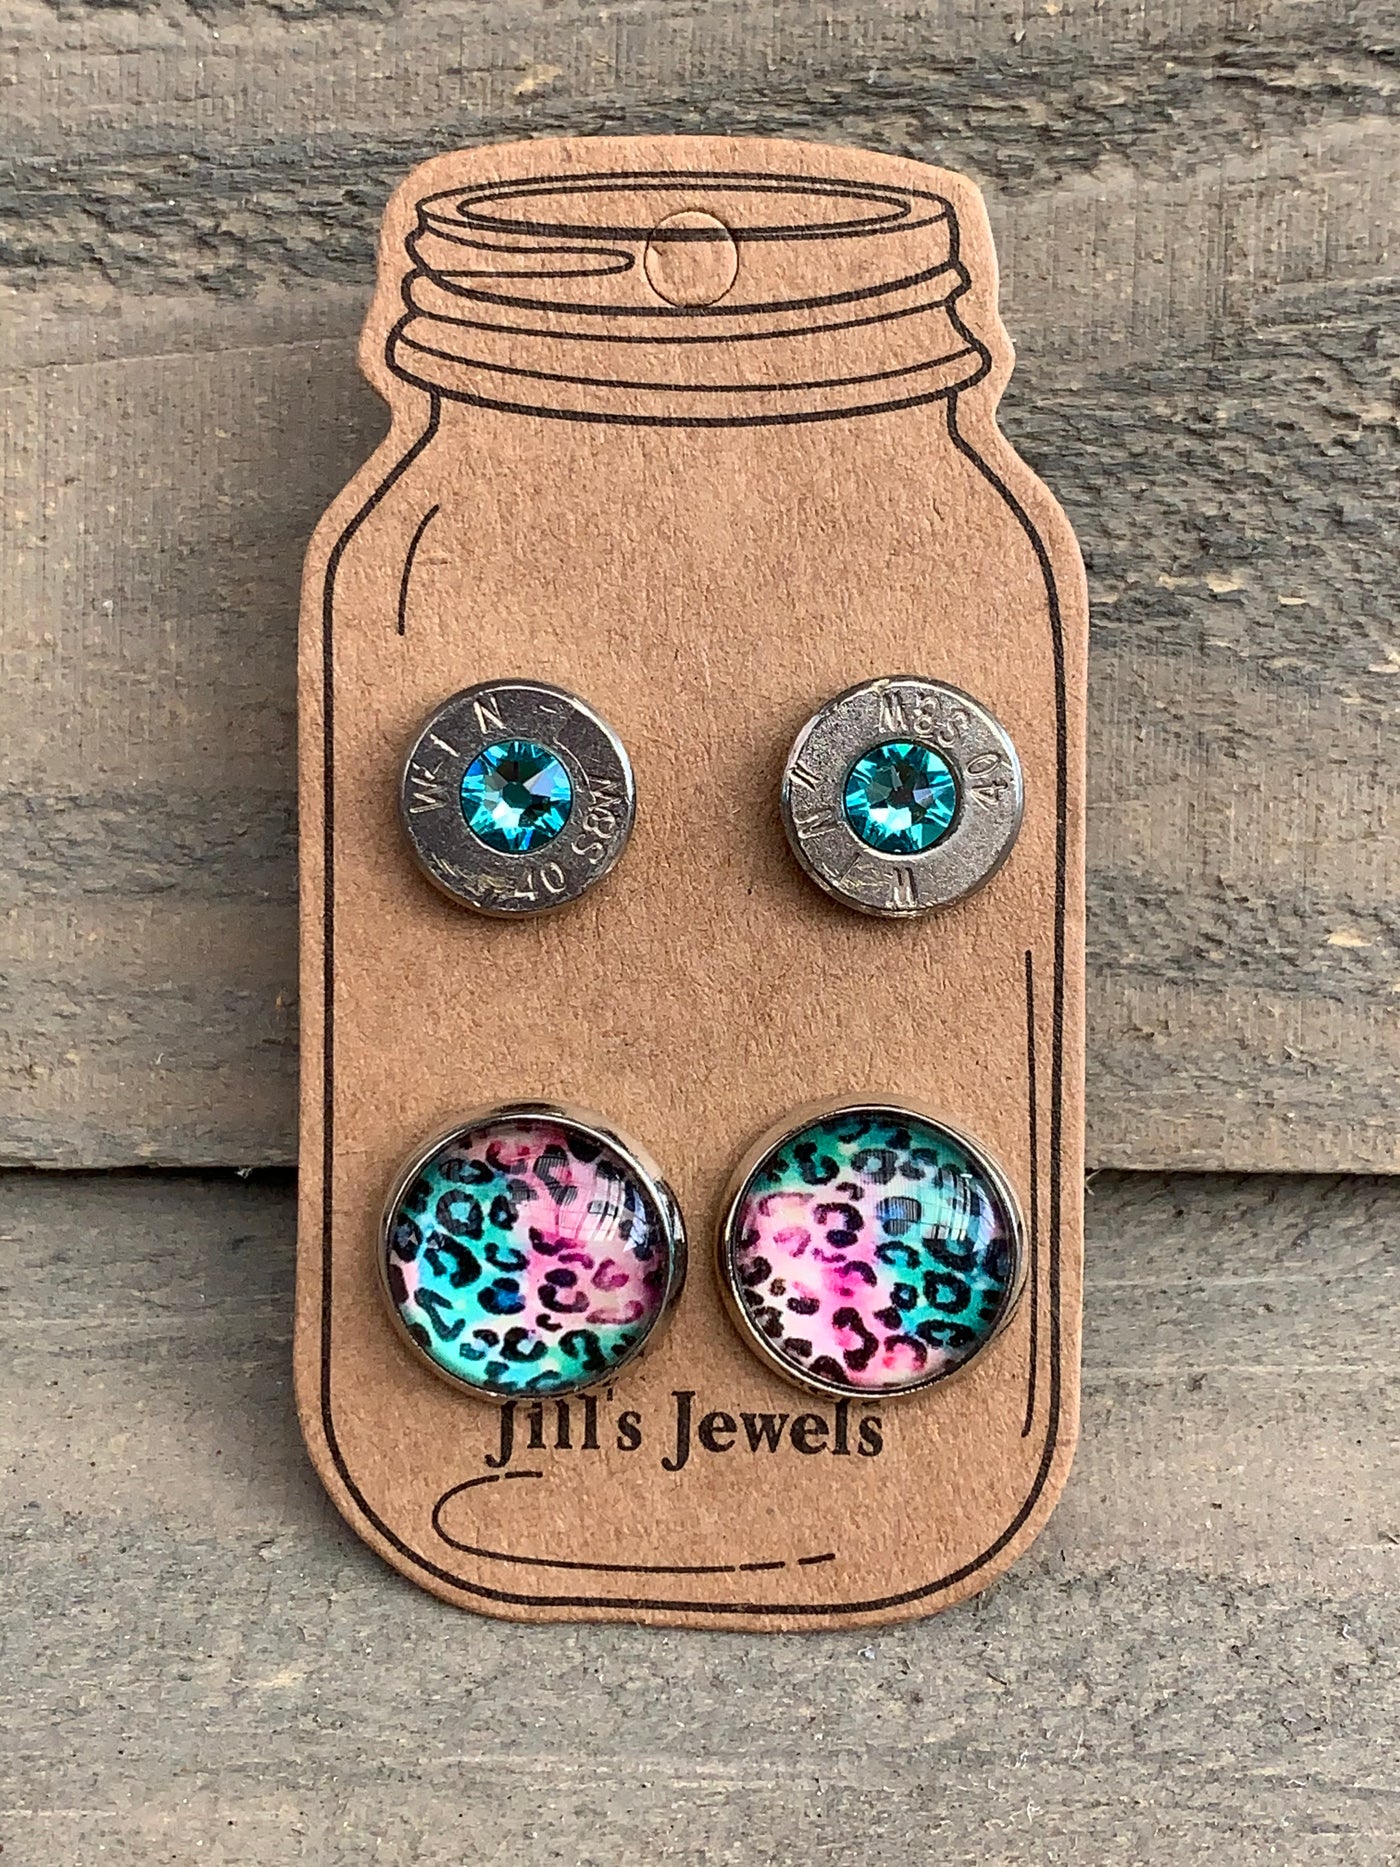 Mint and Pink Leopard 40 Caliber bullet earring set - Jill's Jewels | Unique, Handcrafted, Trendy, And Fun Jewelry